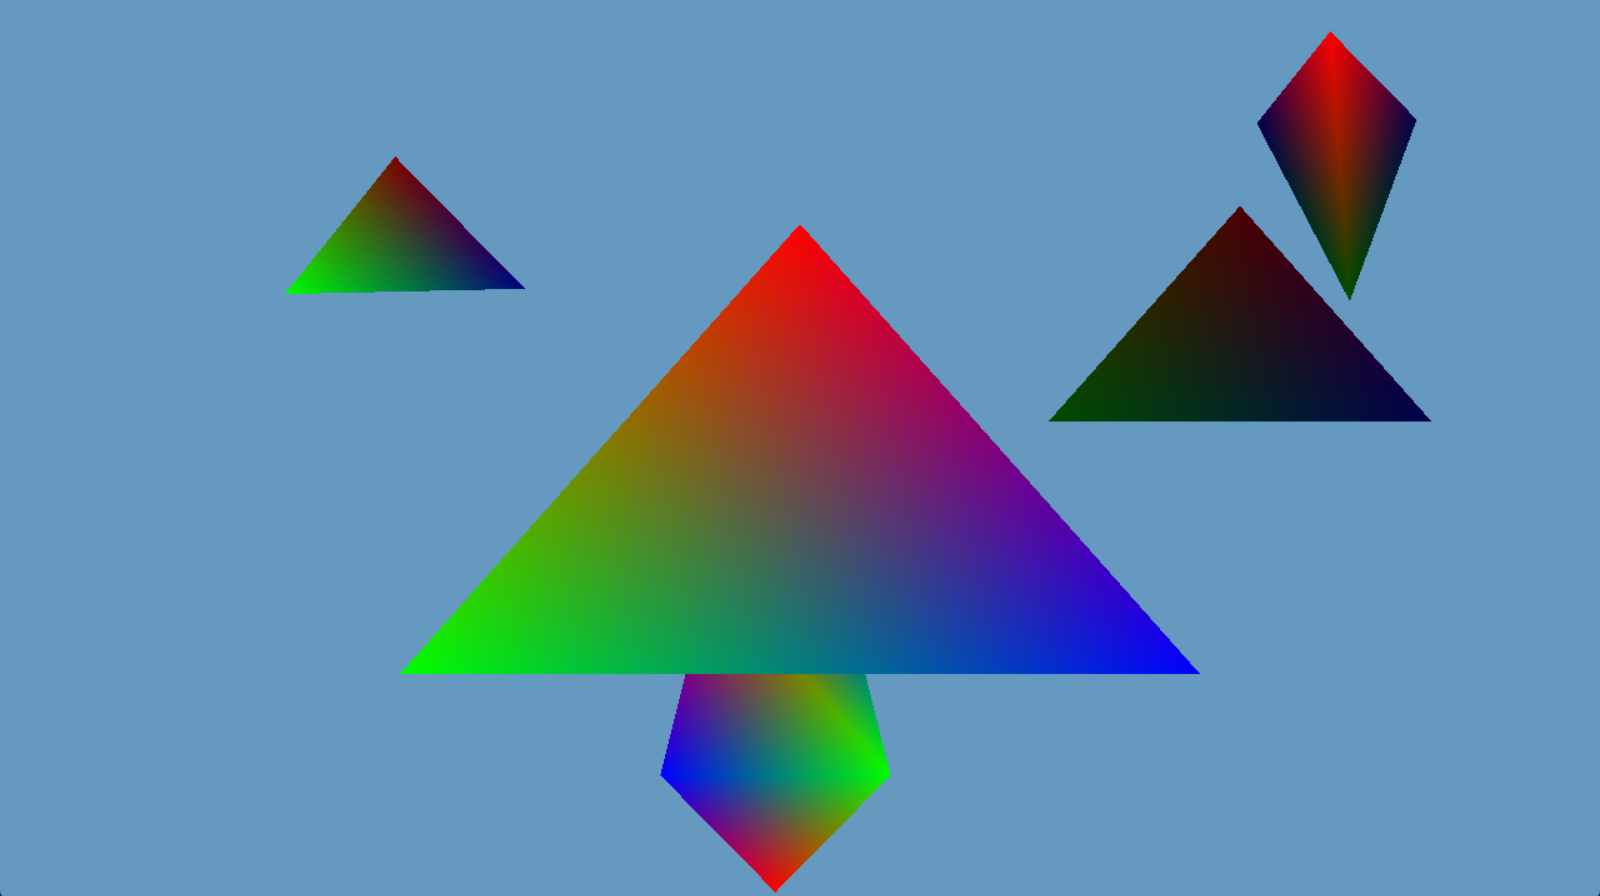 Render of shapes with colors in the frame